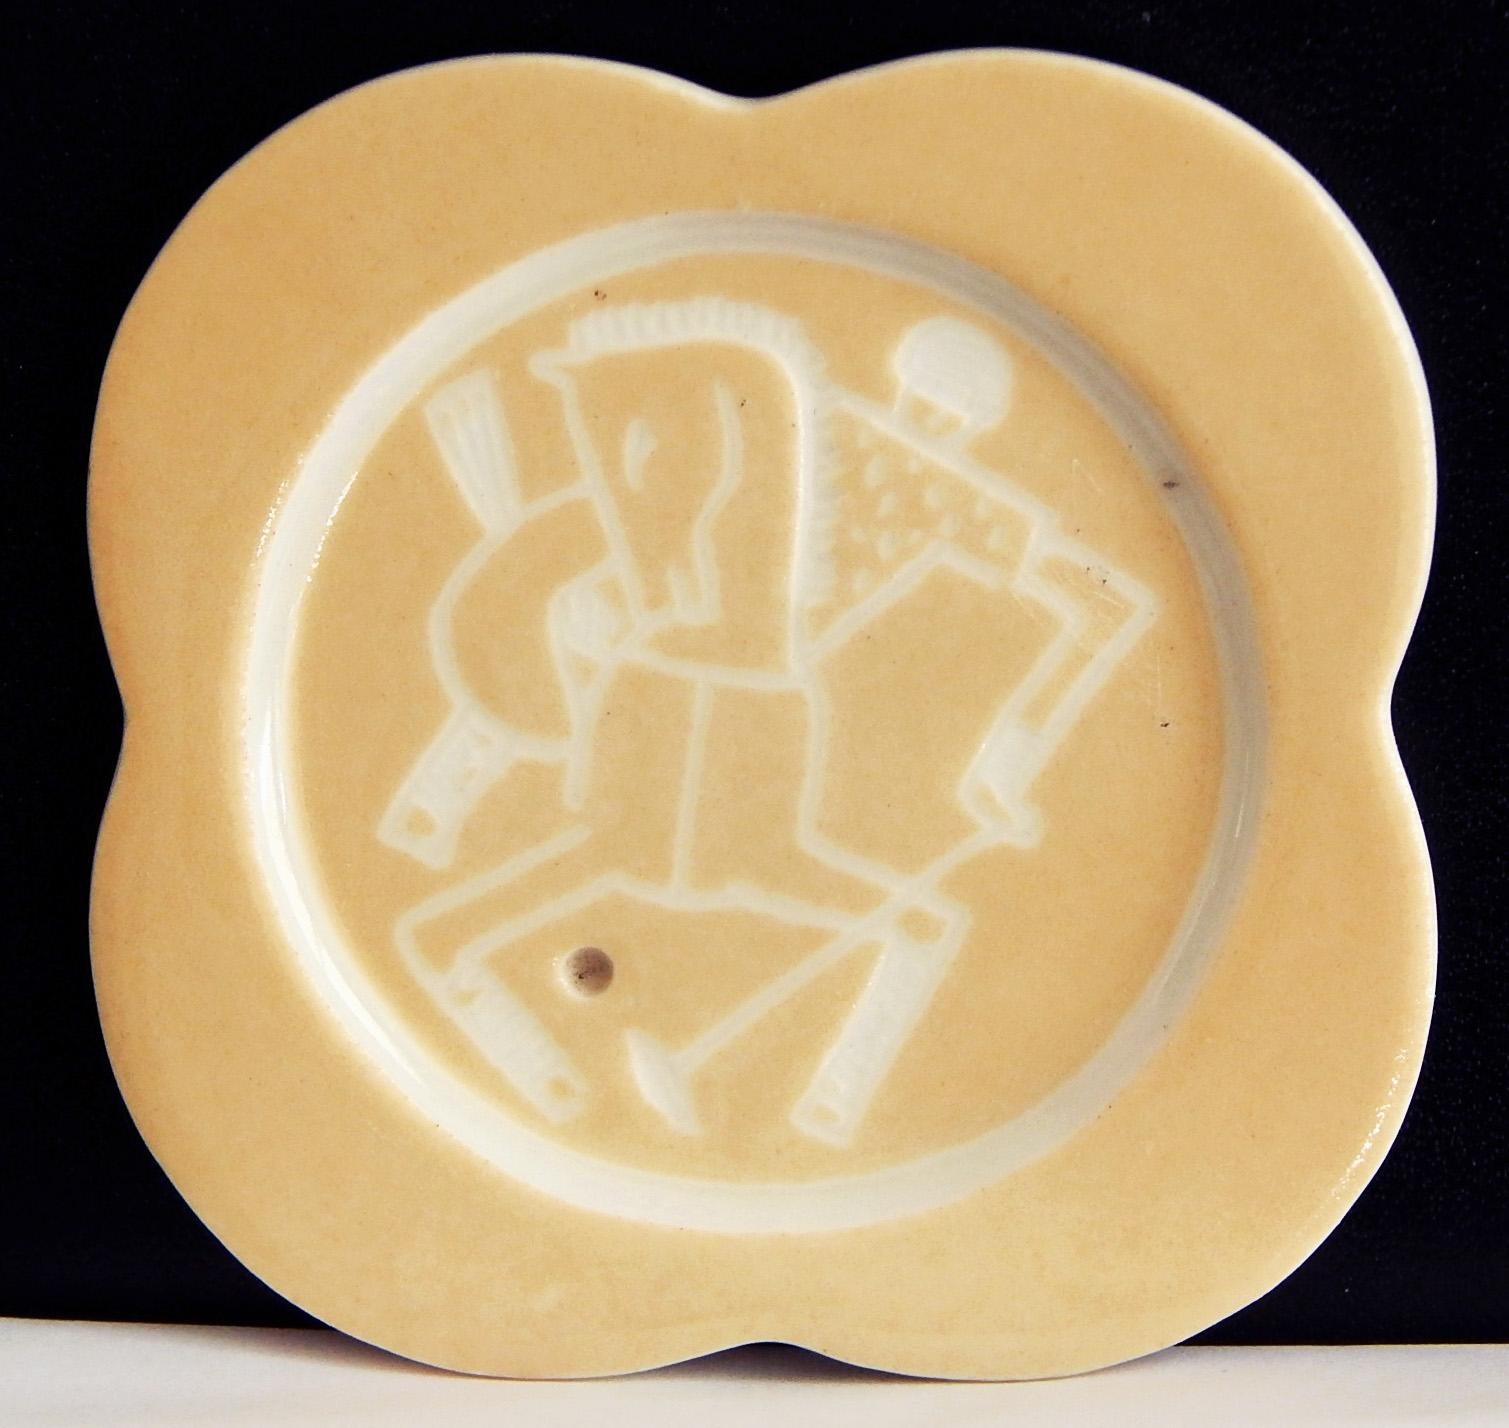 Strikingly sculpted, incised and glazed, this very rare set of five coasters depicting polo players upon their horses -- each of them unique and incised by Gregory's hand -- is glazed in white and a warm, golden putty hue.  Gregory was famous for